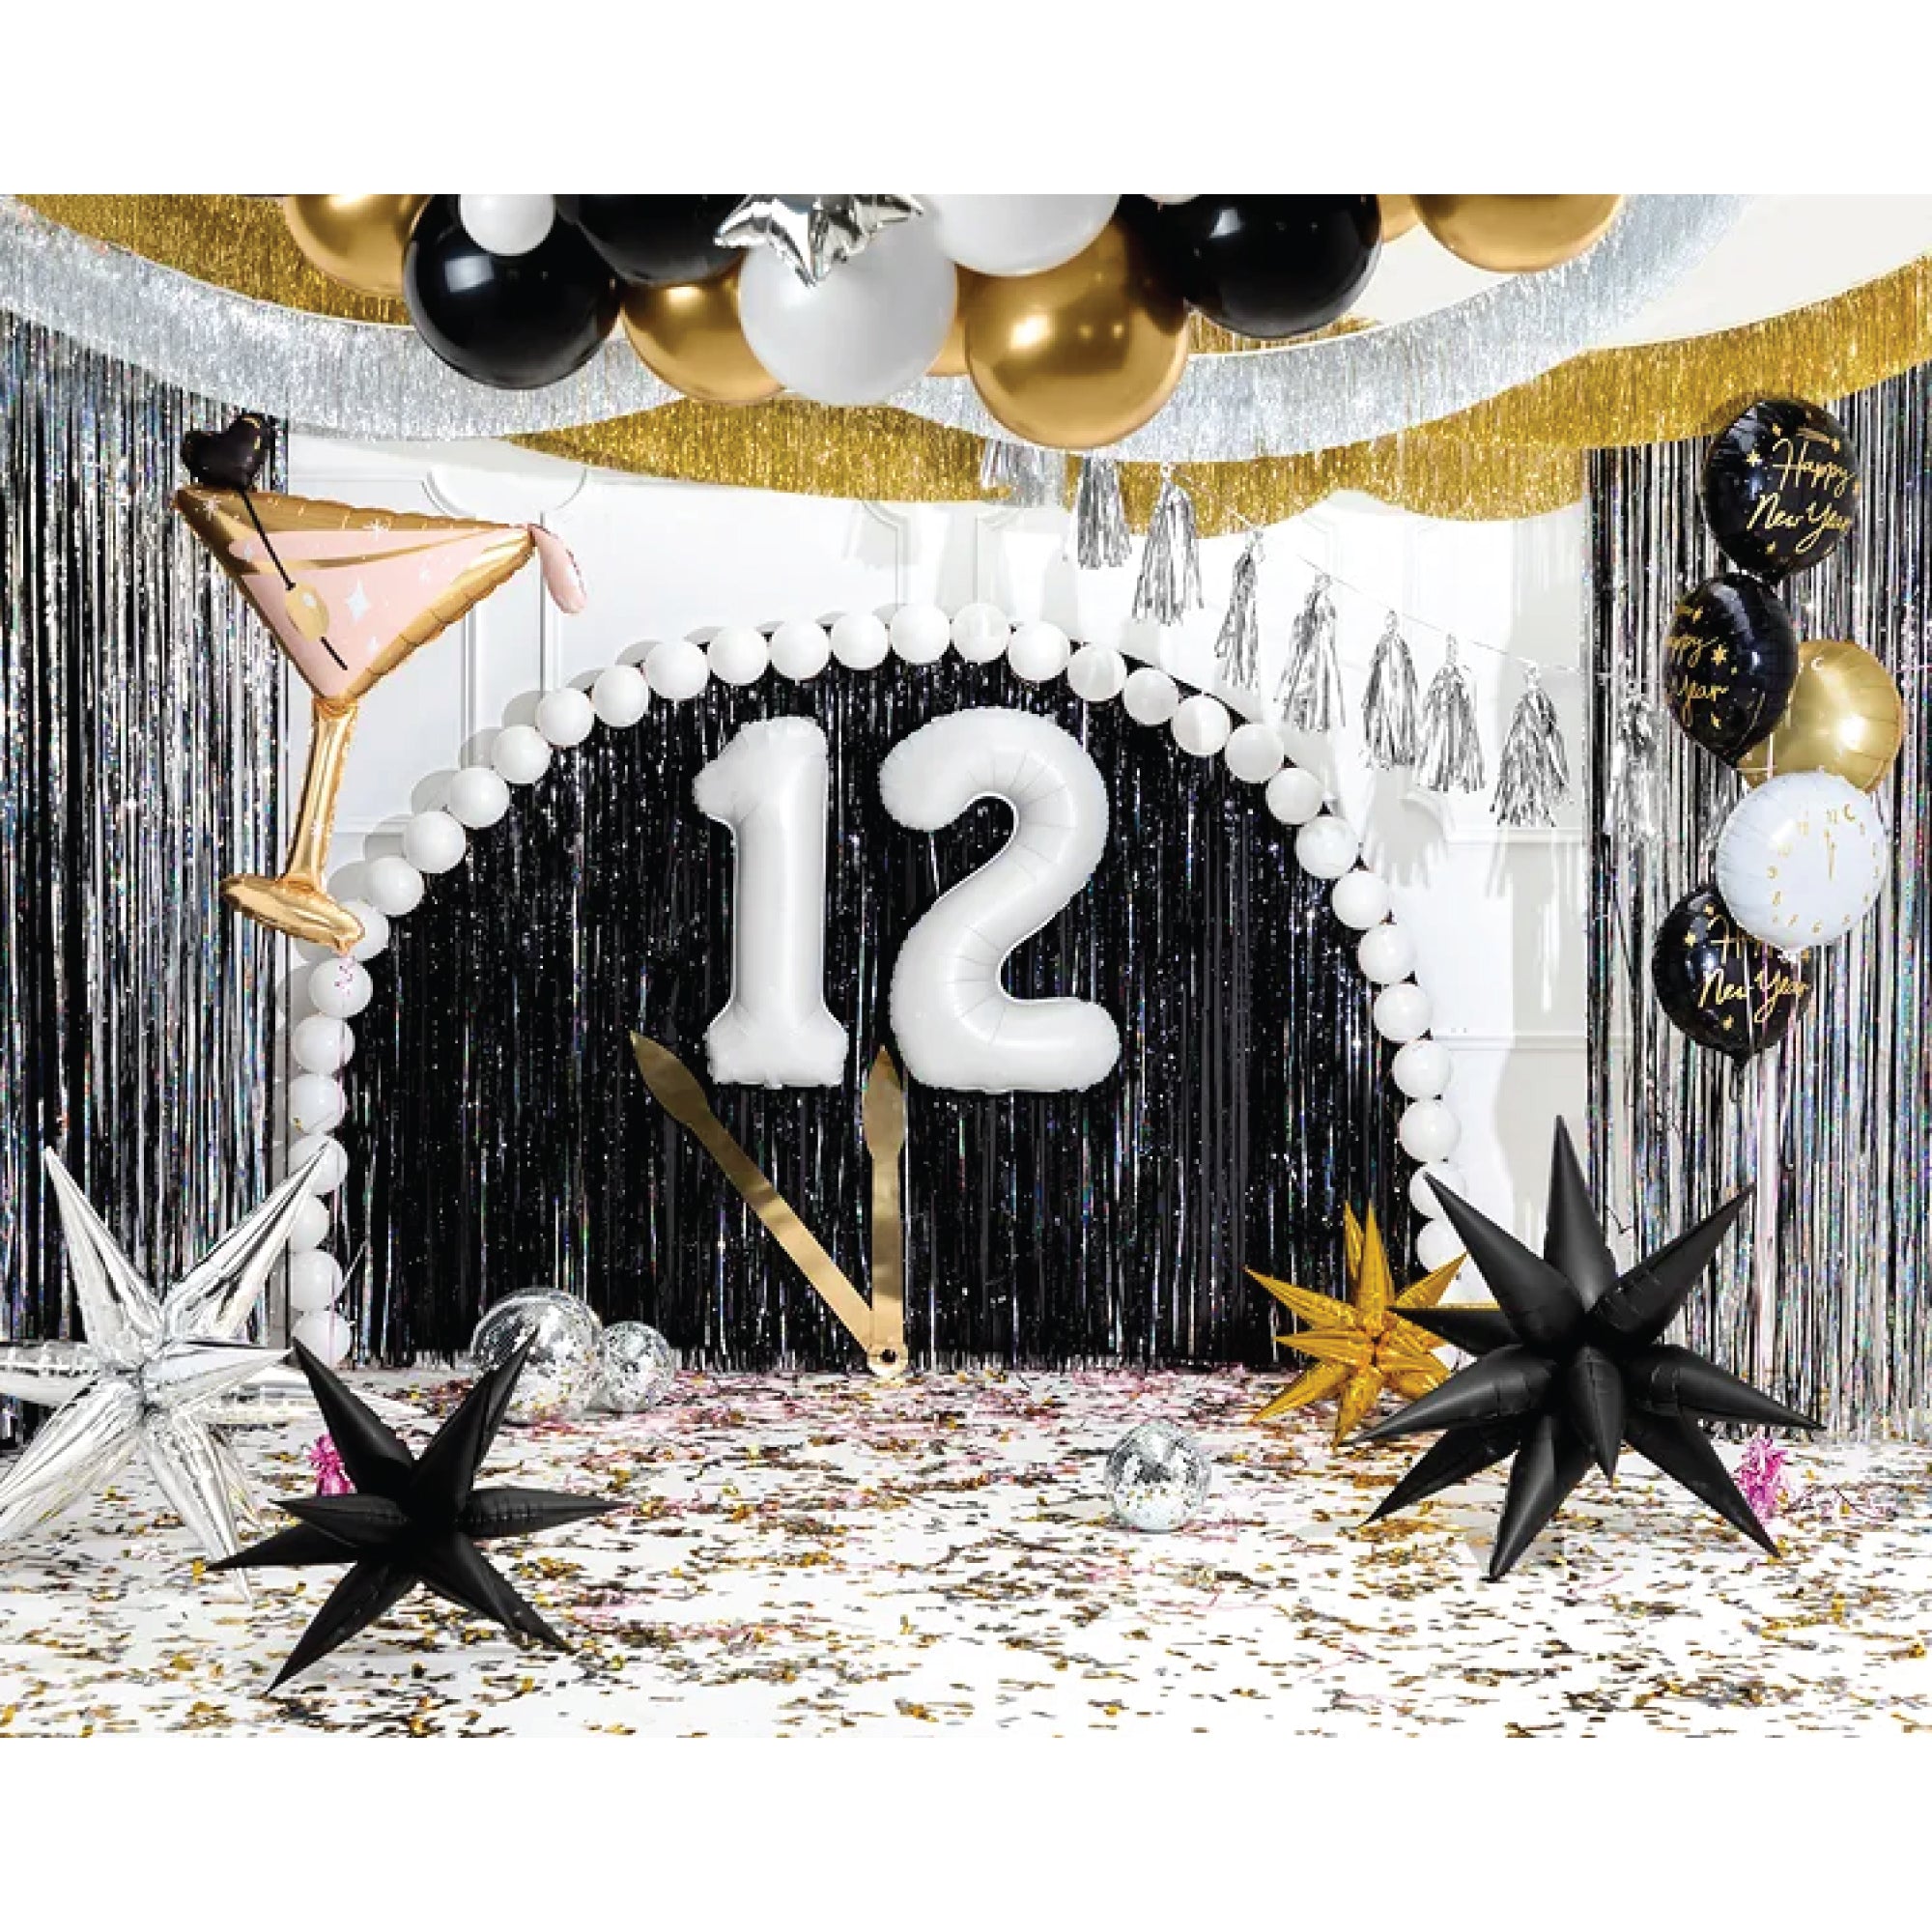 Black Starburst Balloon 27.5in | The Party Darling